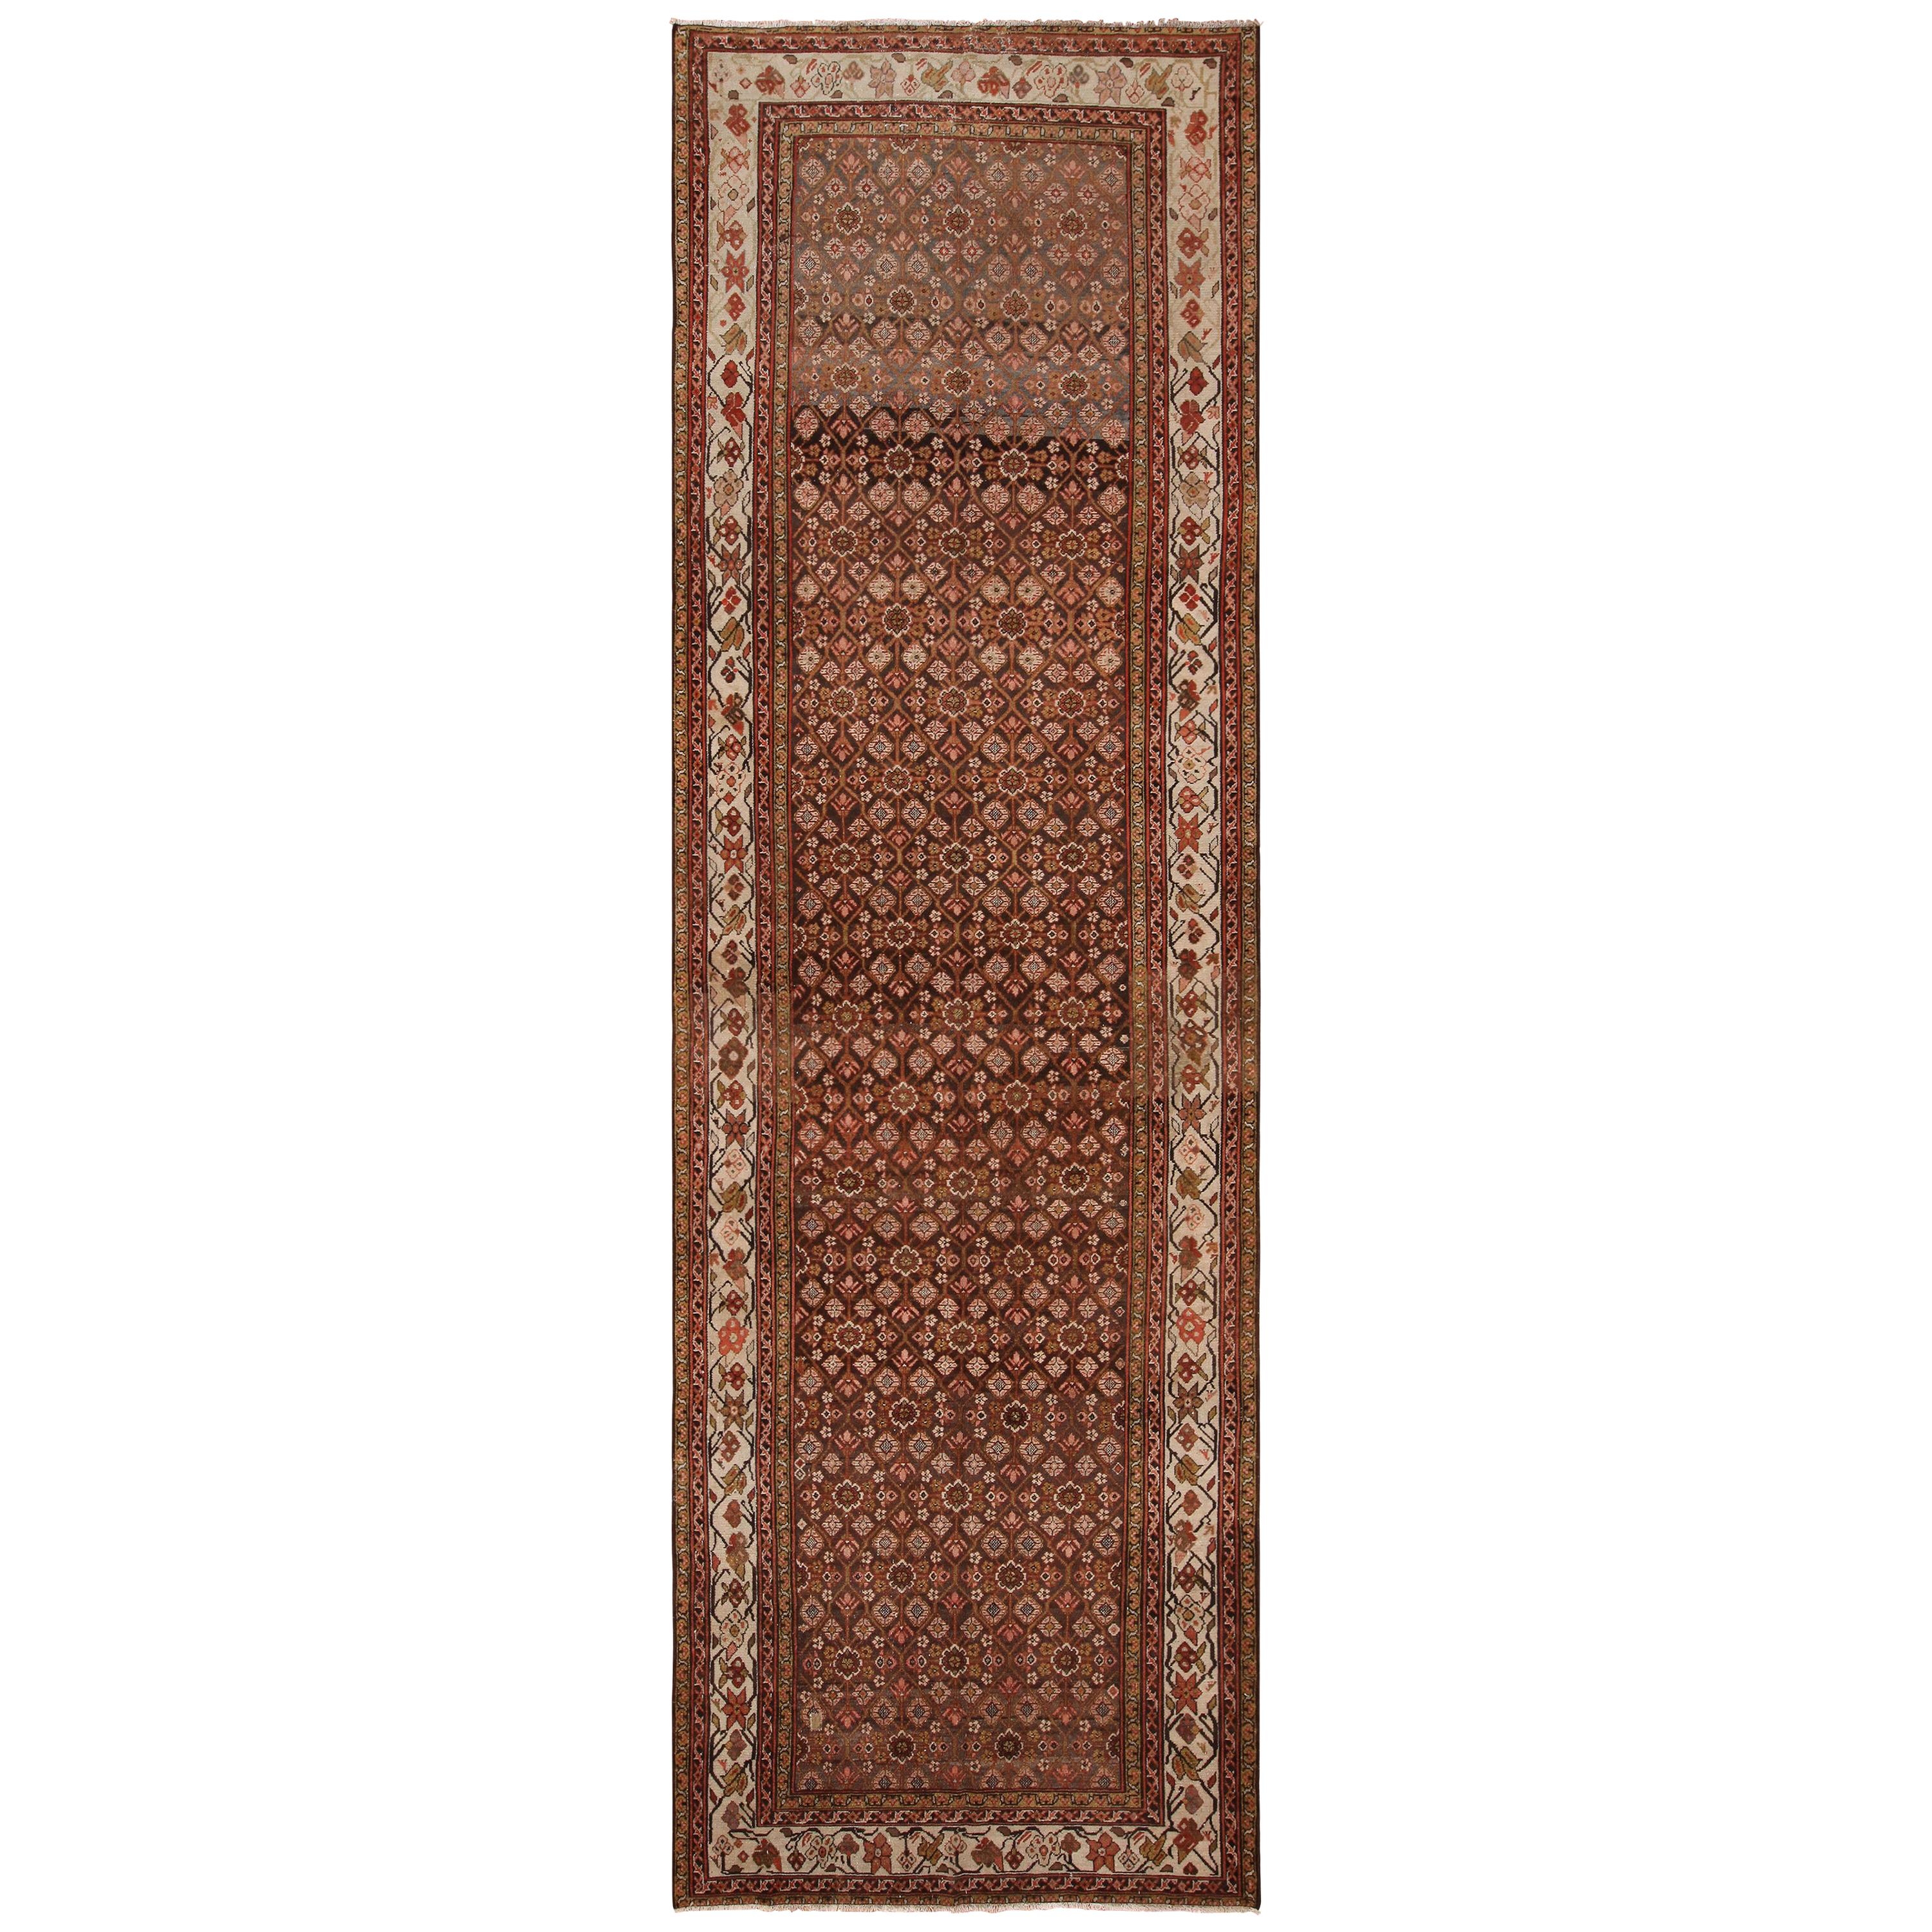 Antique Persian Malayer Runner Rug. Size: 5 ft 2 in x 16 ft 7 in